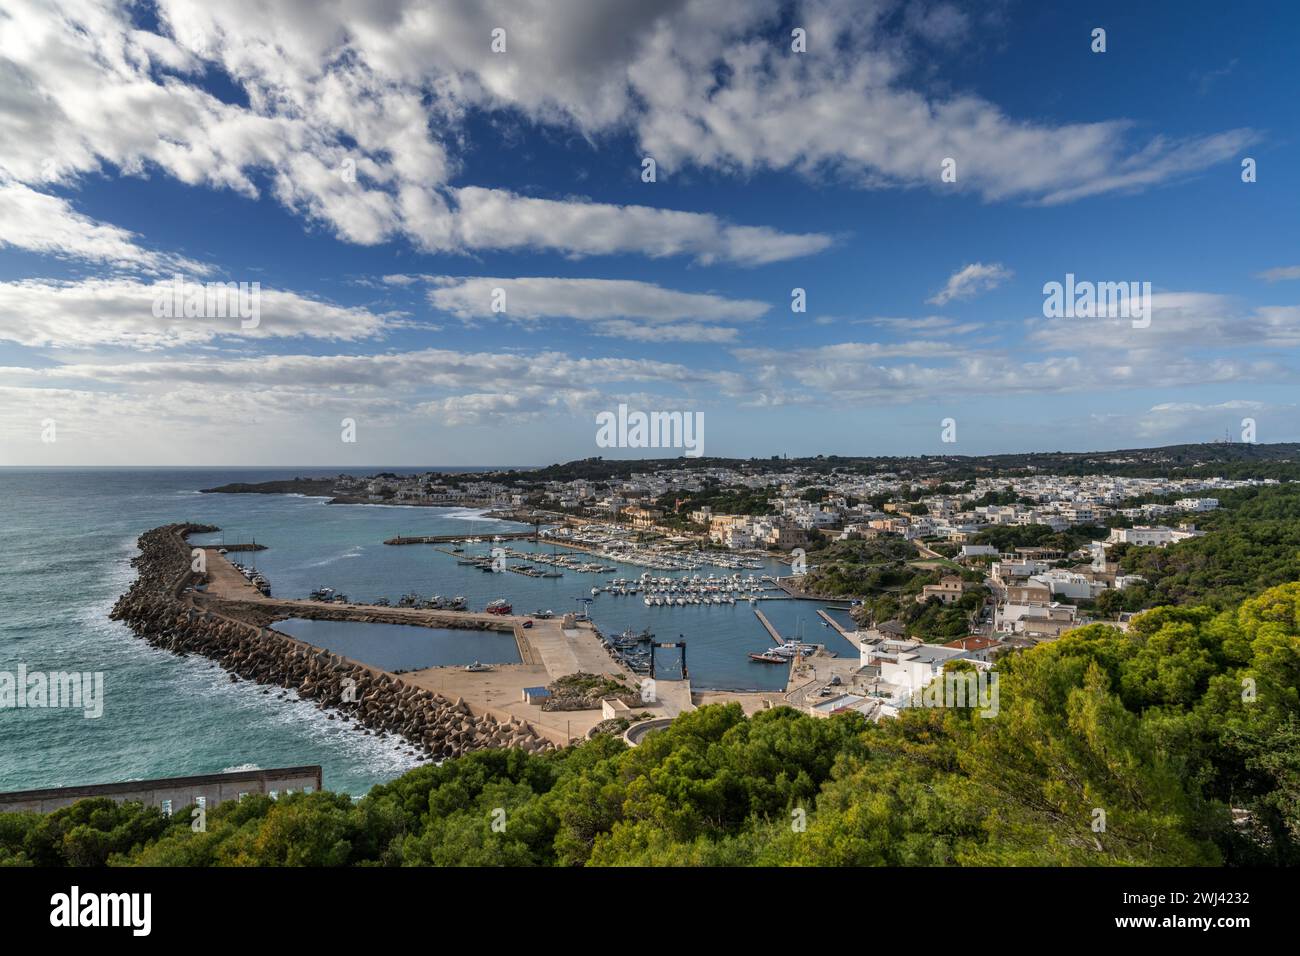 View of the harbor and port town of Santa Marina di Leuca in southern Italy Stock Photo